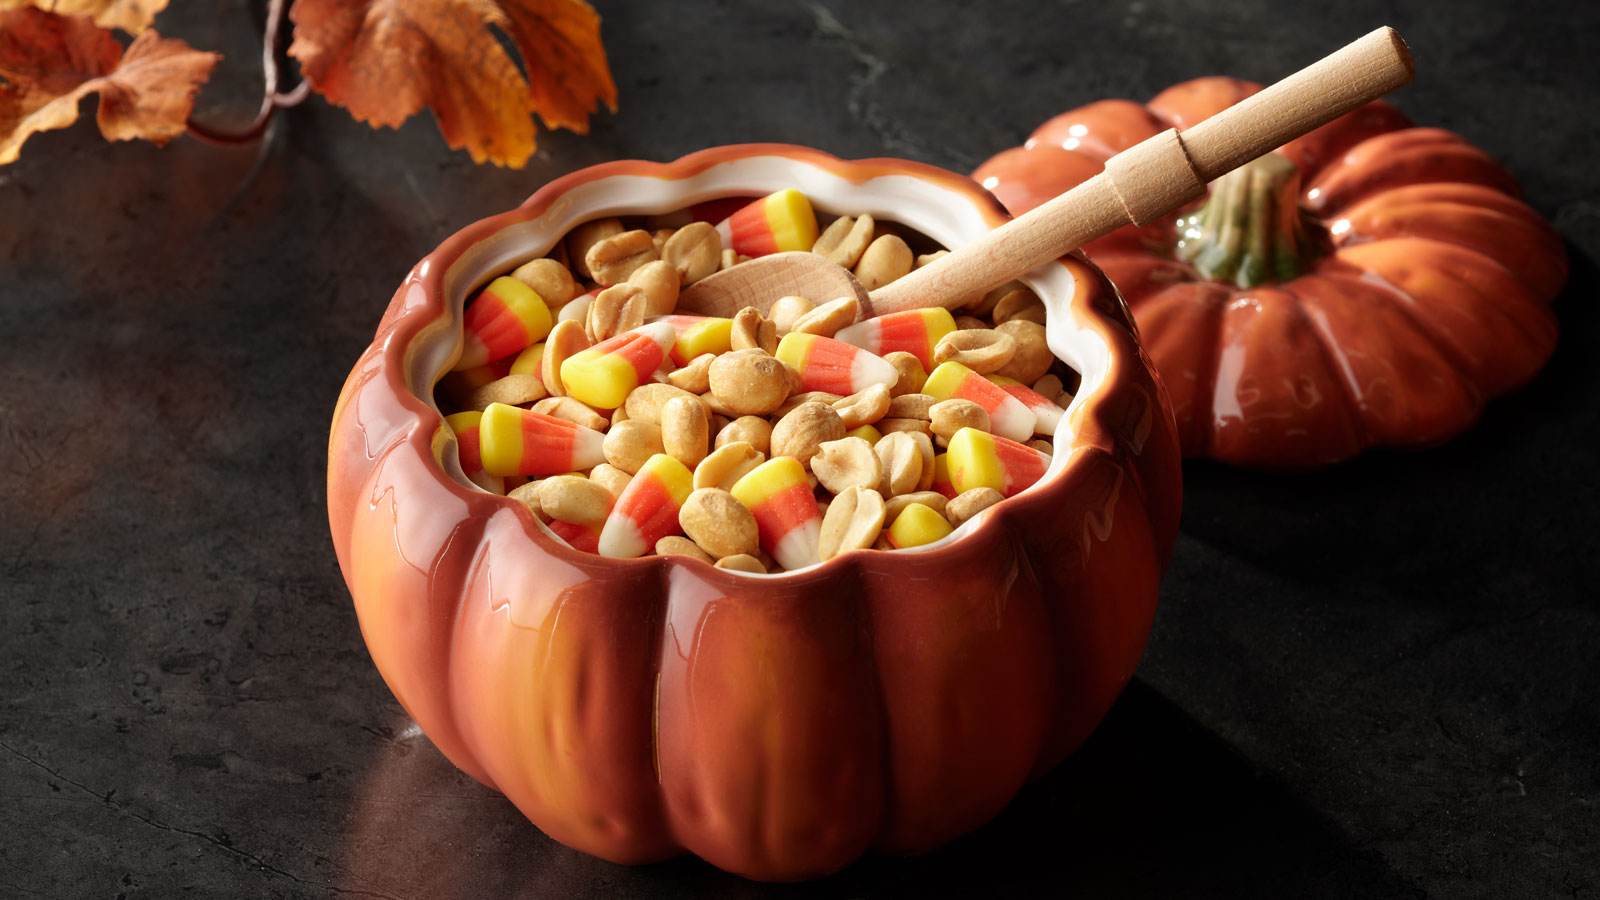 HALLOWEEN PEANUTS AND CANDY CORN